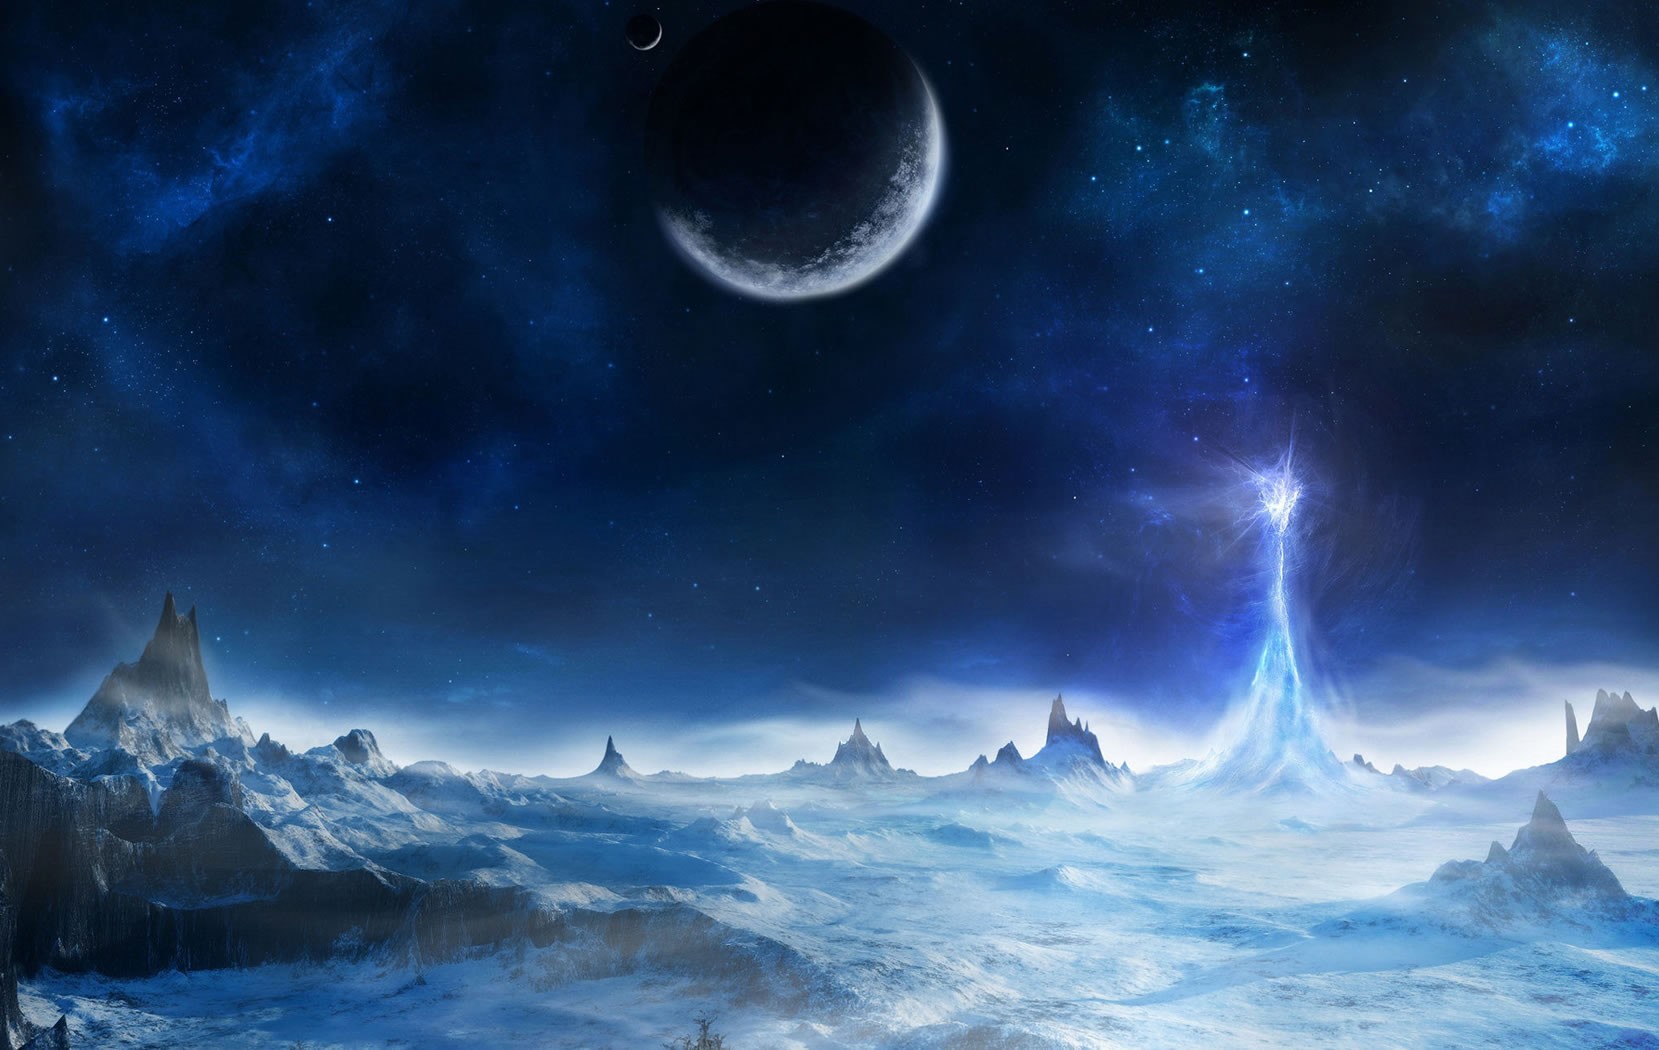 Live Space Wallpaper For Pc | Free Hd Wallpapers